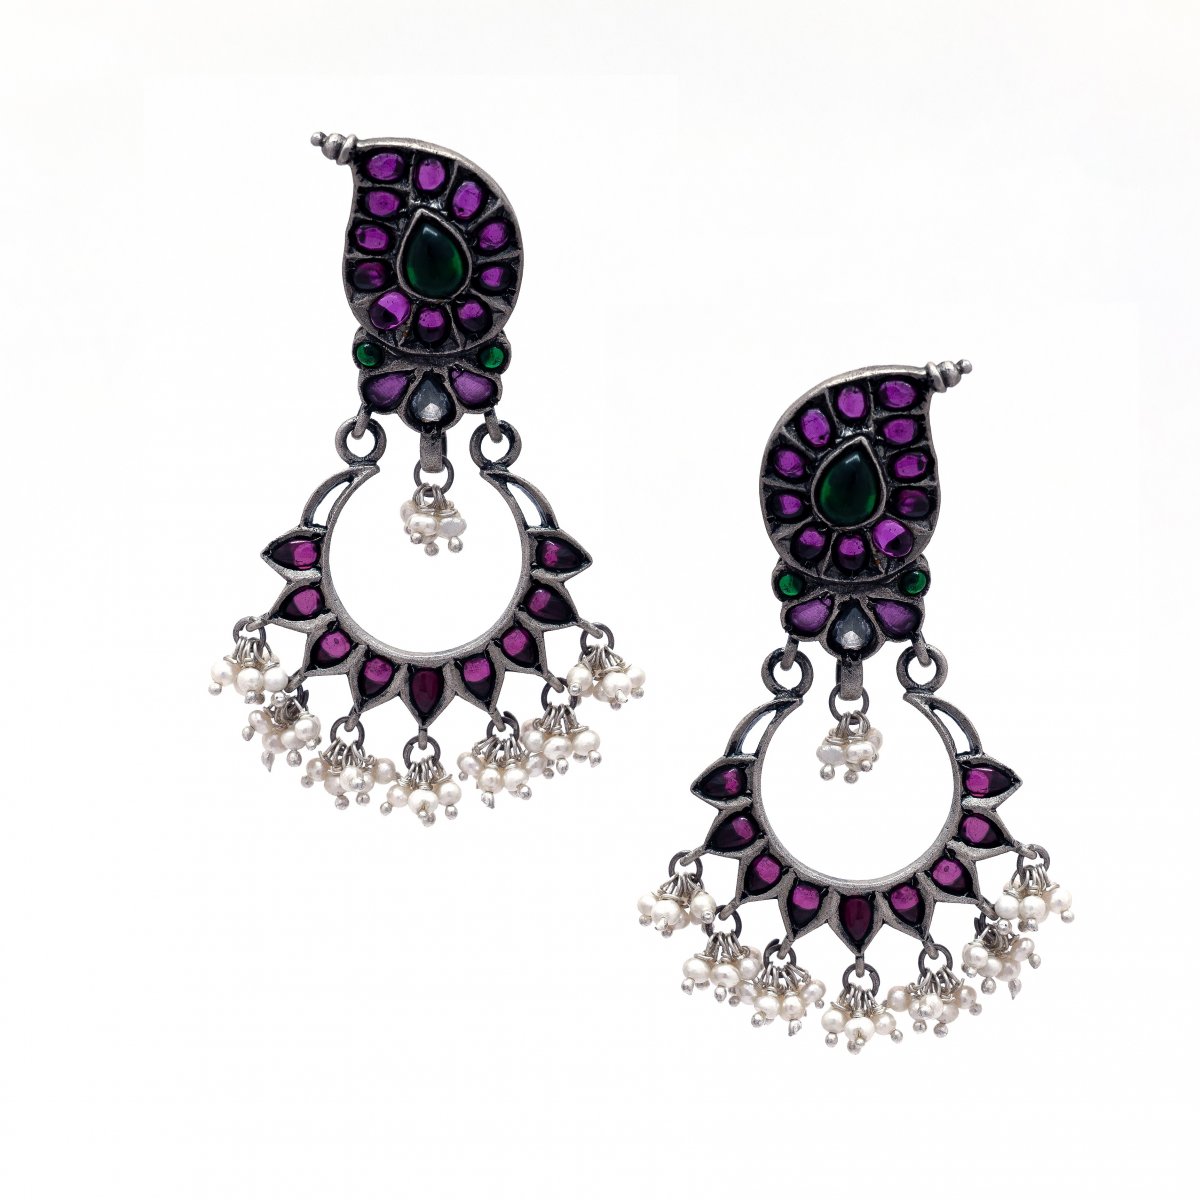 92.5 LIGHTWEIGHT SILVER OXIDIZED TRADITIONAL JHUMKA JHUMKI EARRINGS FOR WOMEN AND GIRLS 